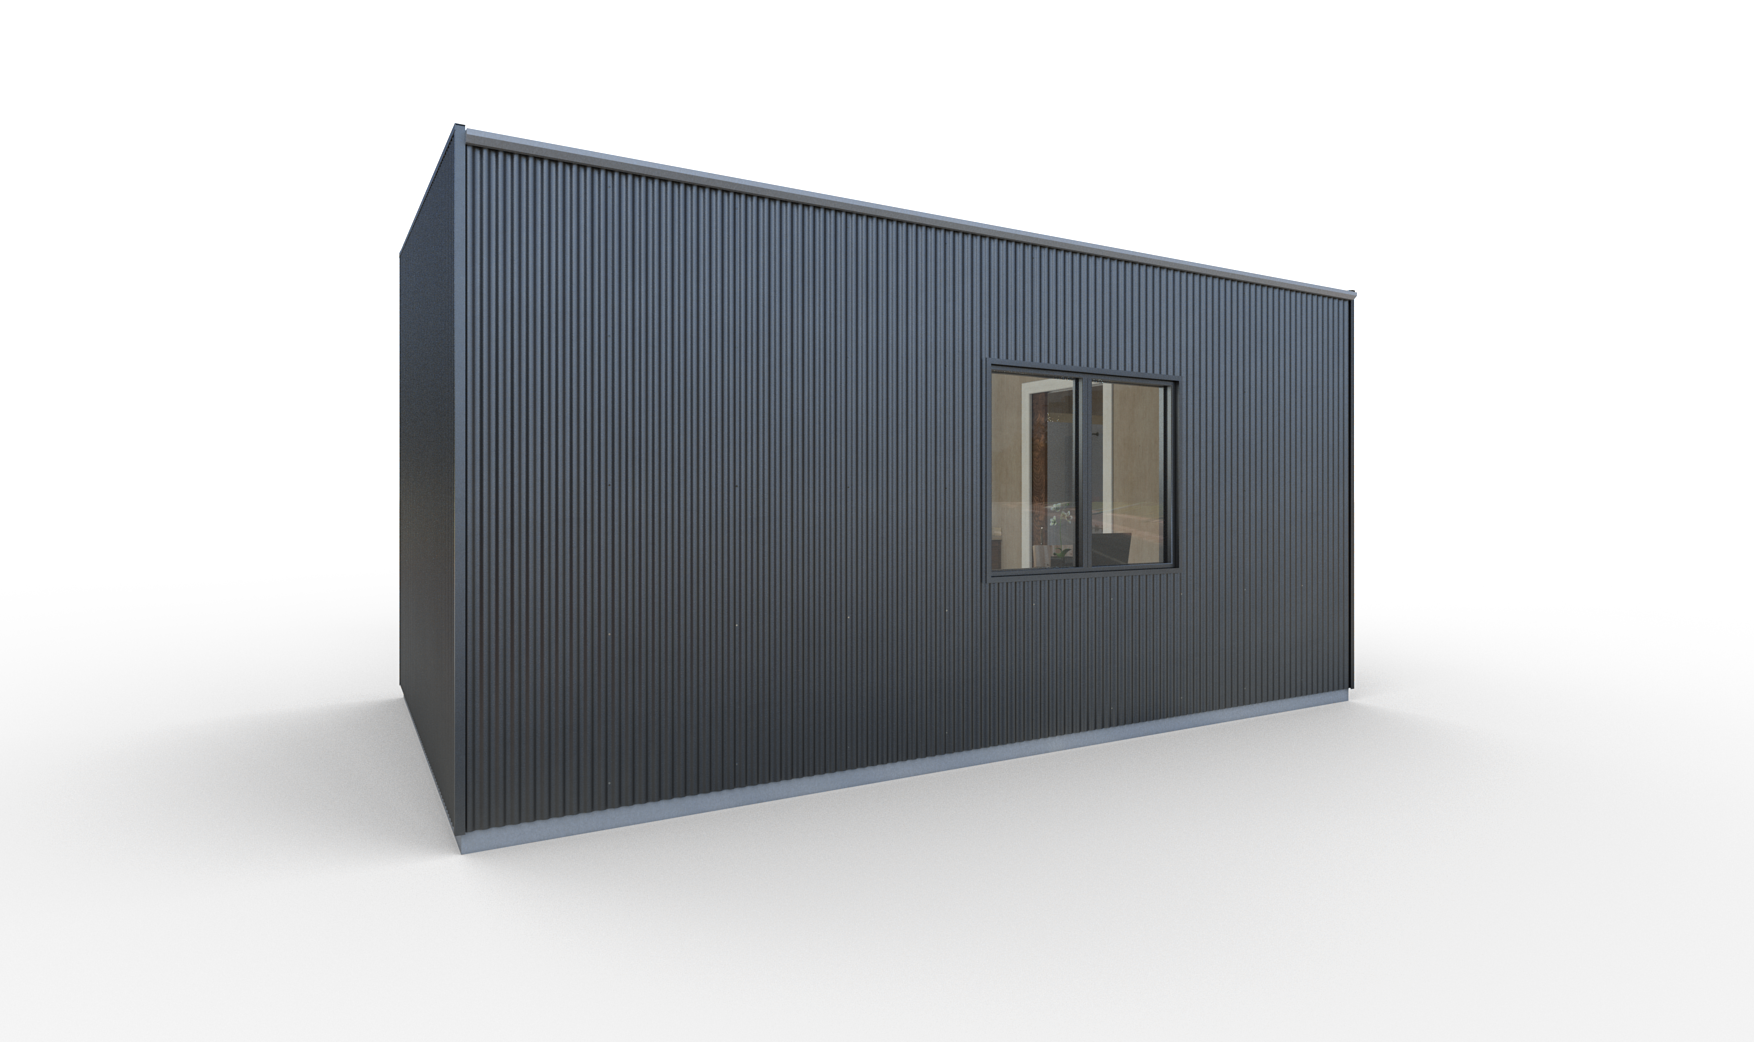  The sides and back are clad in charcoal steel panels. Or continue the cypress siding as an optional upgrade. 